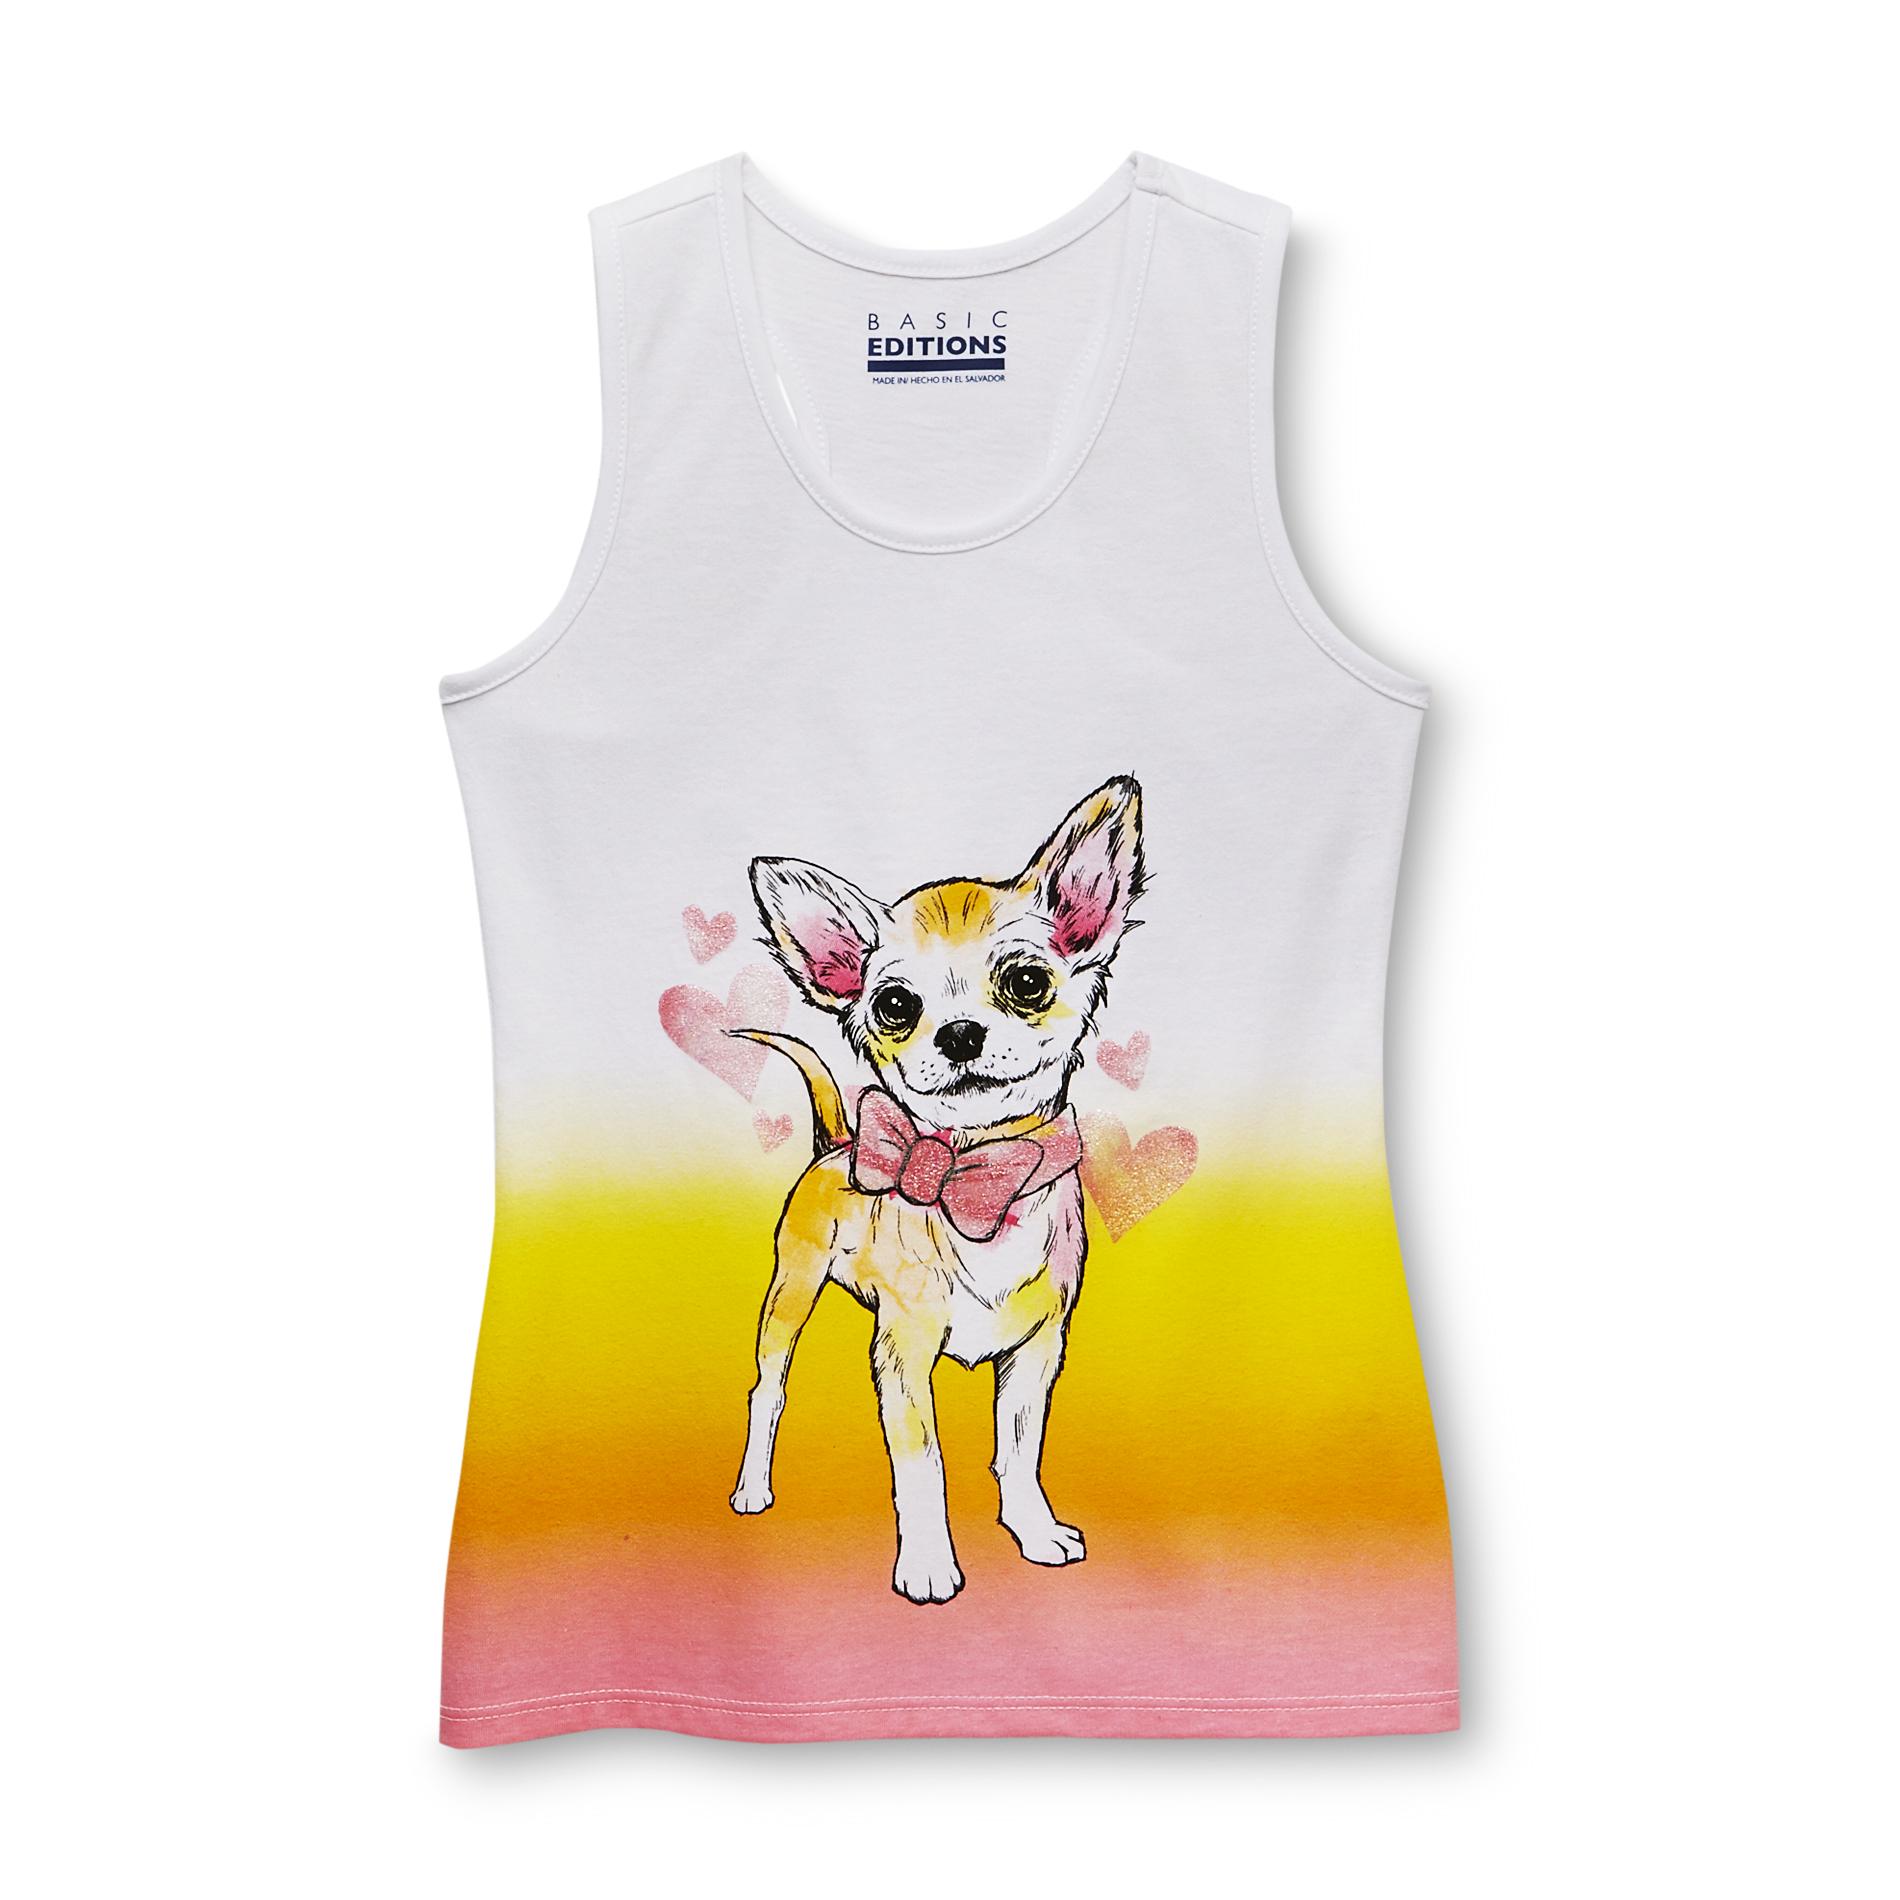 Basic Editions Girl's Racerback Tank Top - Ombre Dog